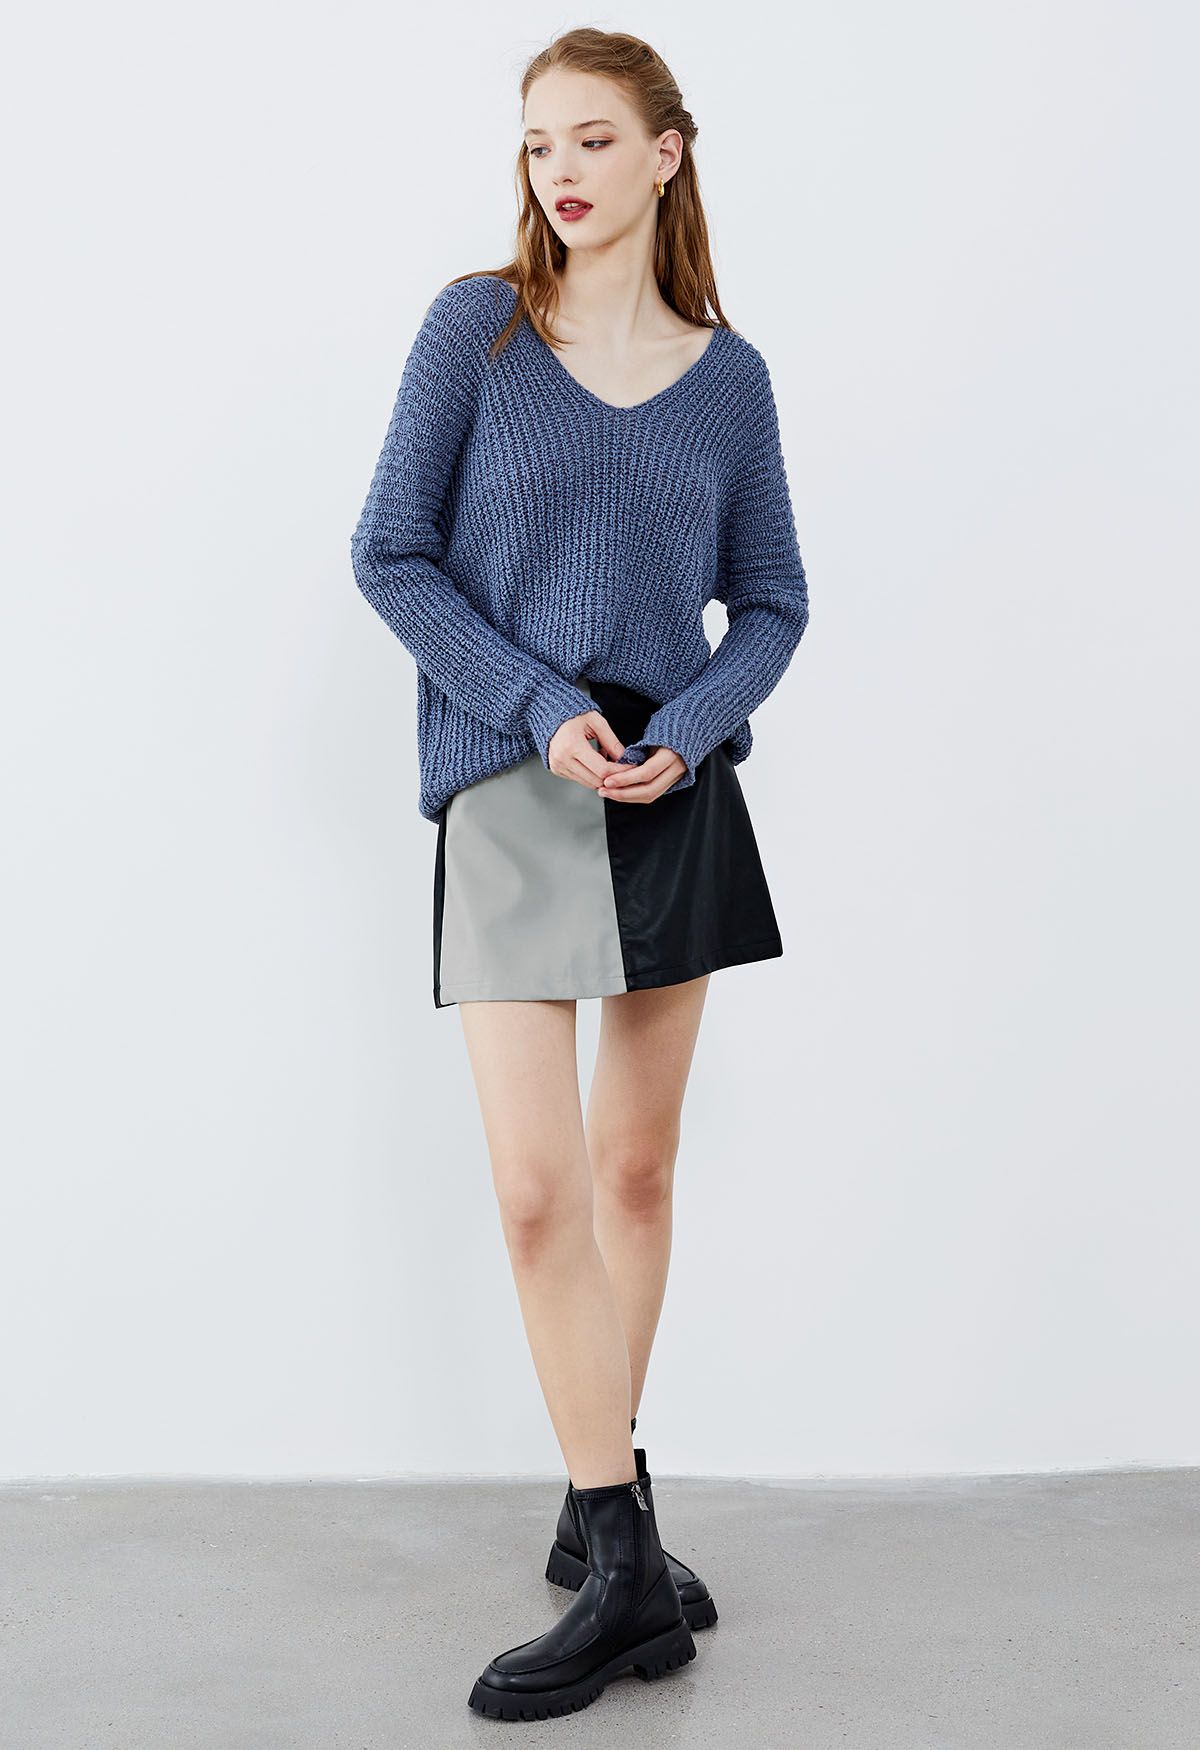 Texture Ribbed Knit V-Neck Sweater in Dusty Blue